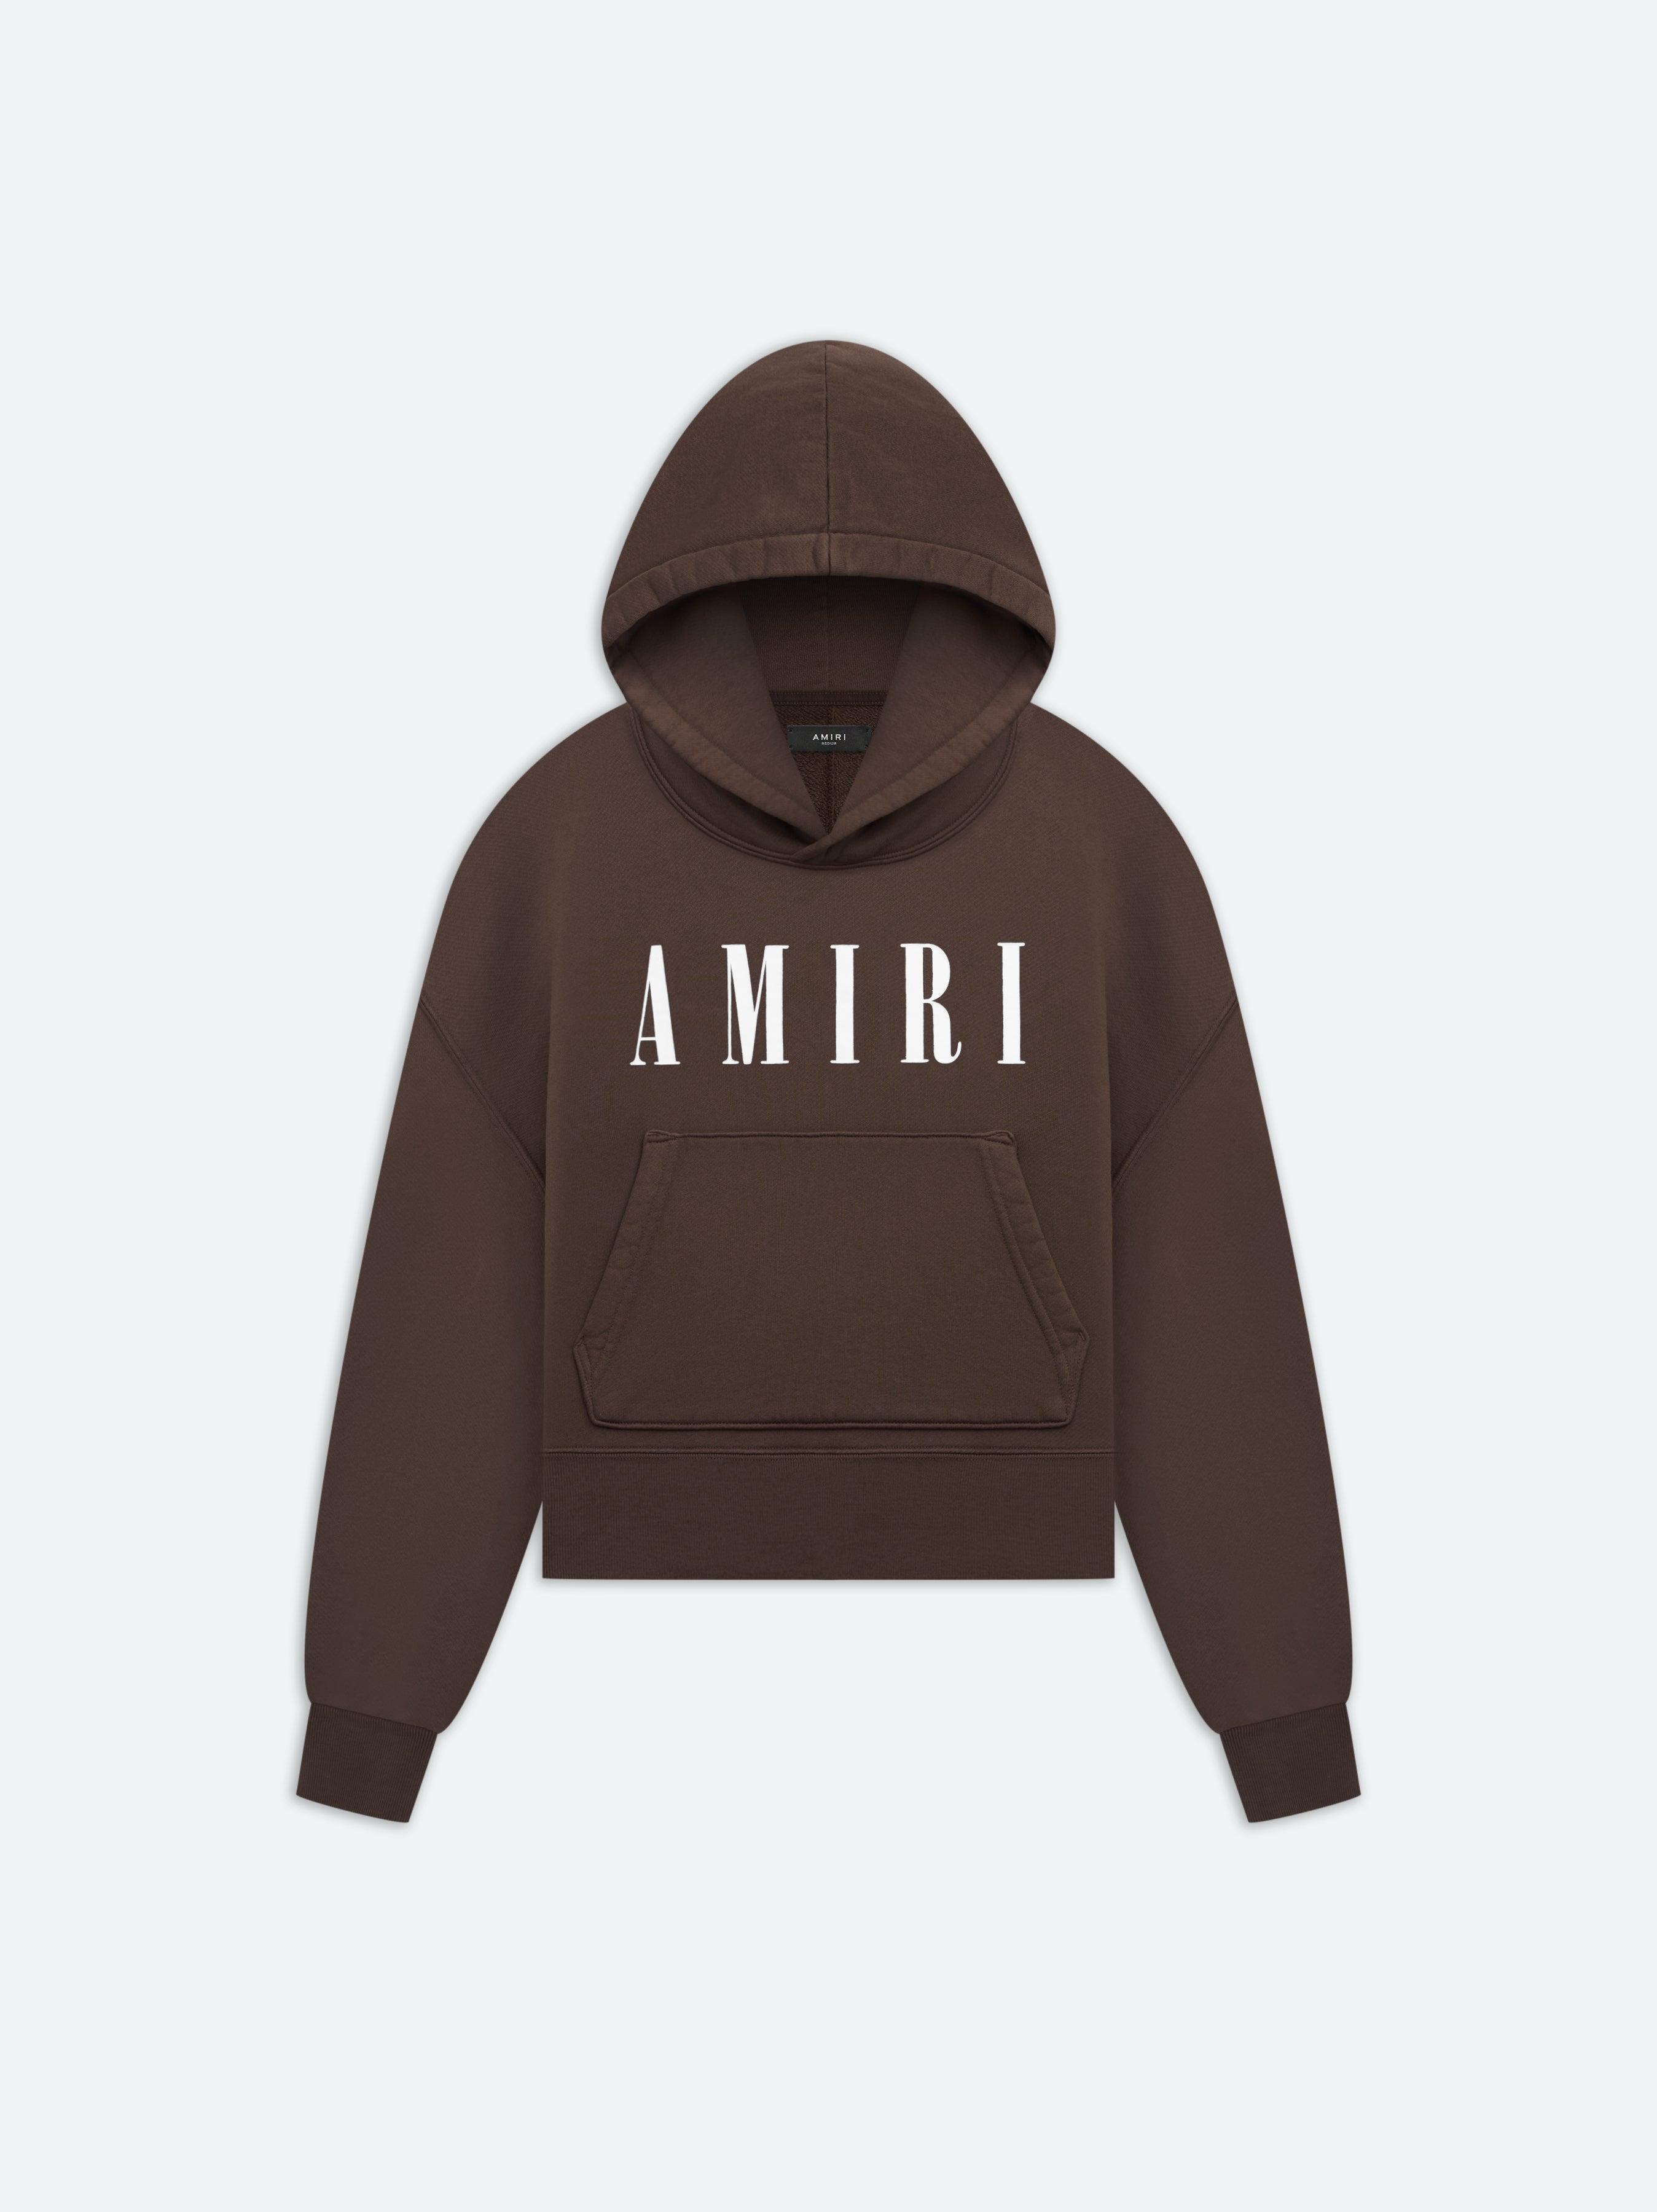 Product WOMEN - CORE LOGO HOODIE - Brown featured image